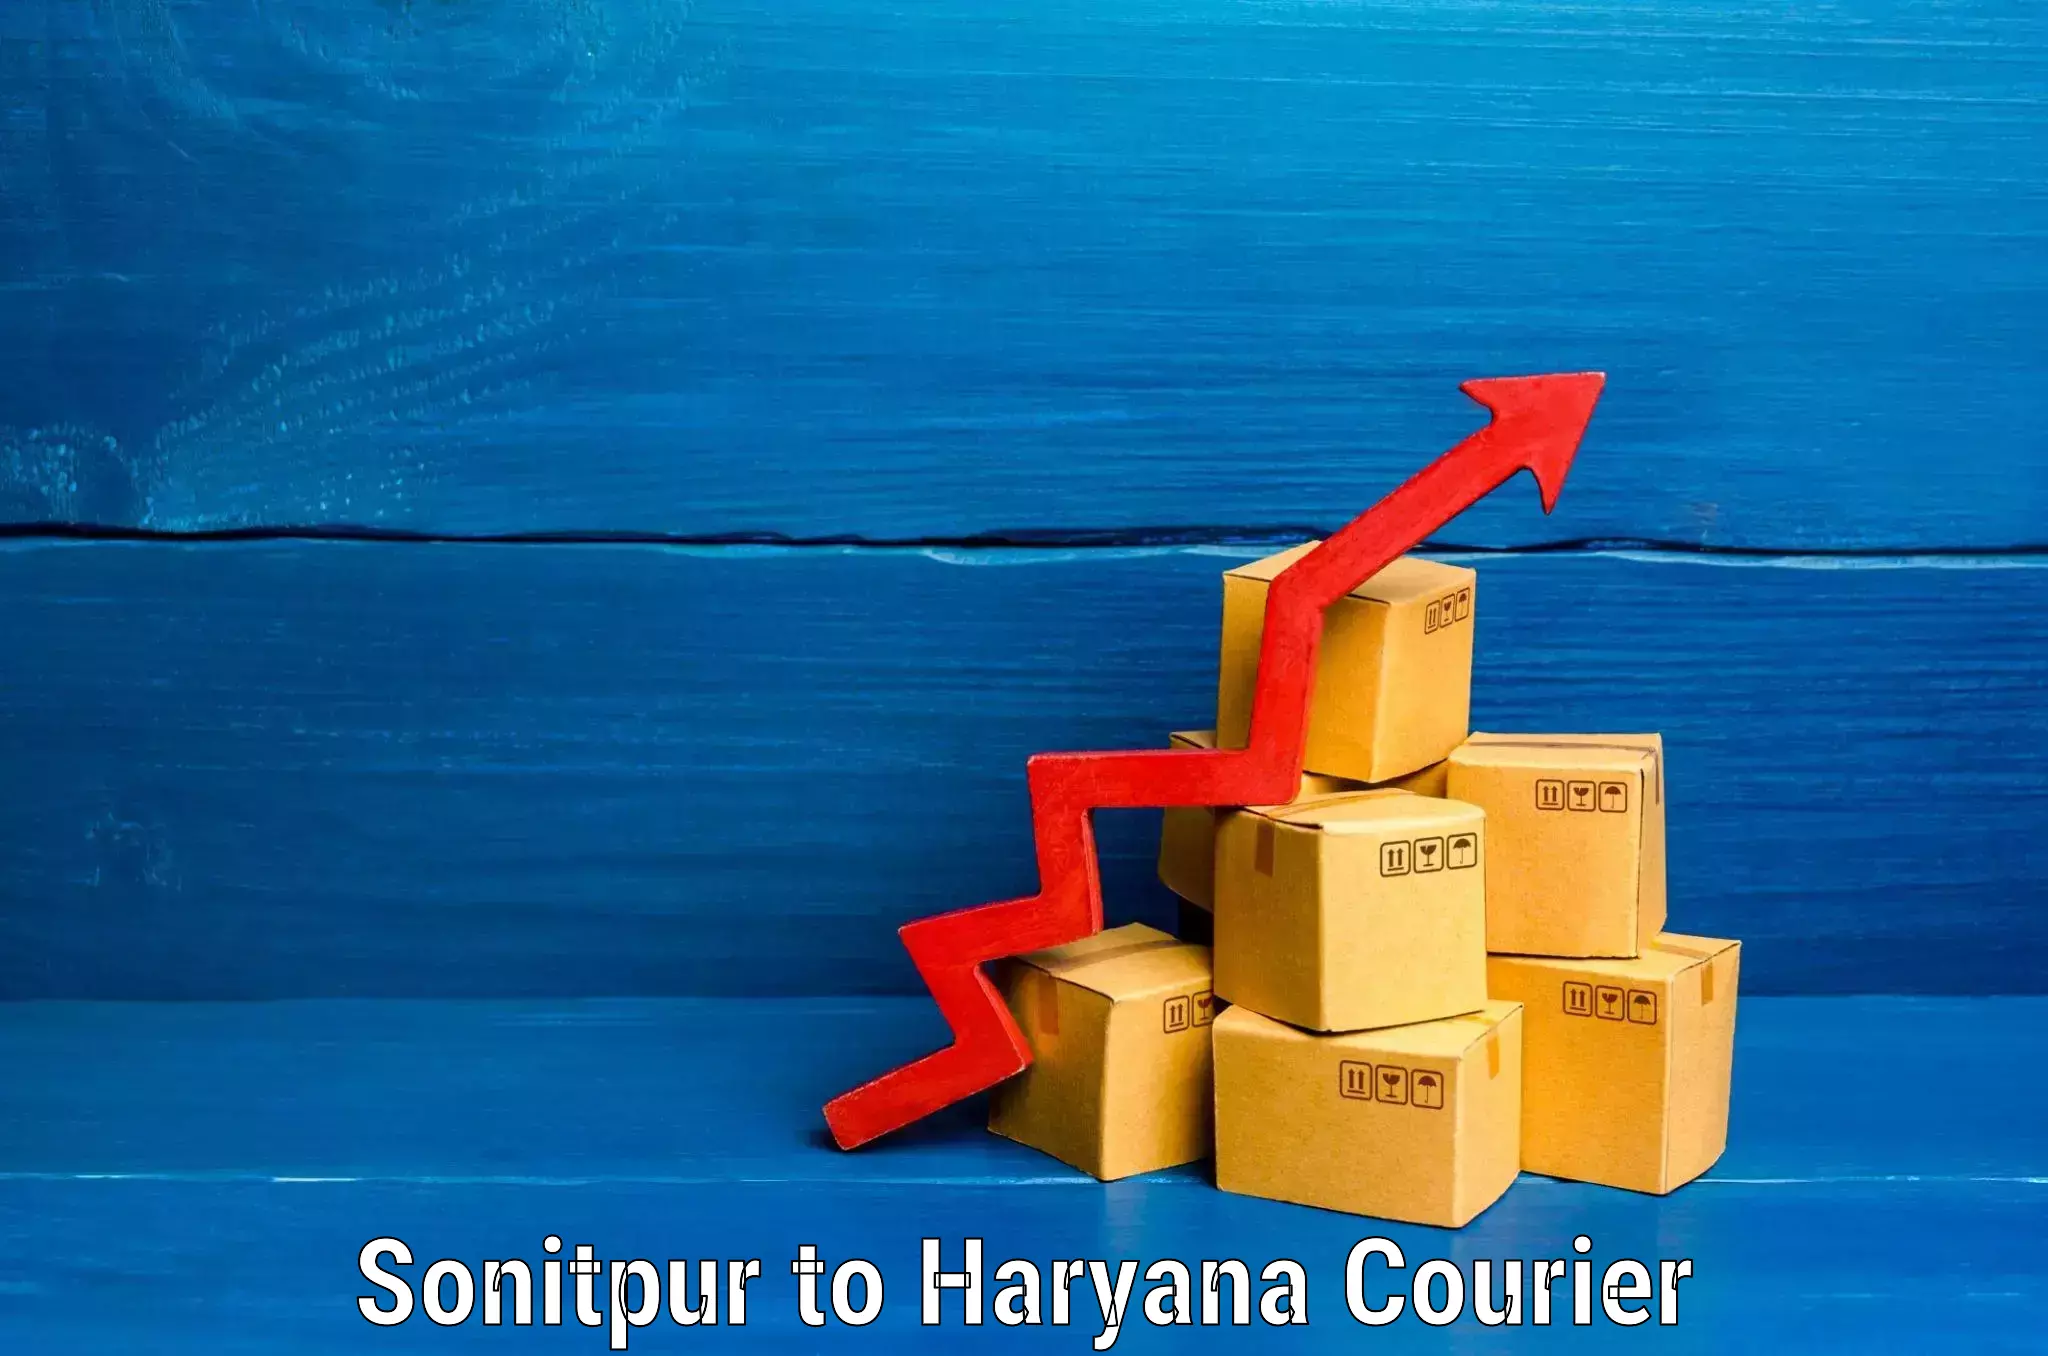 Luggage dispatch service Sonitpur to NCR Haryana